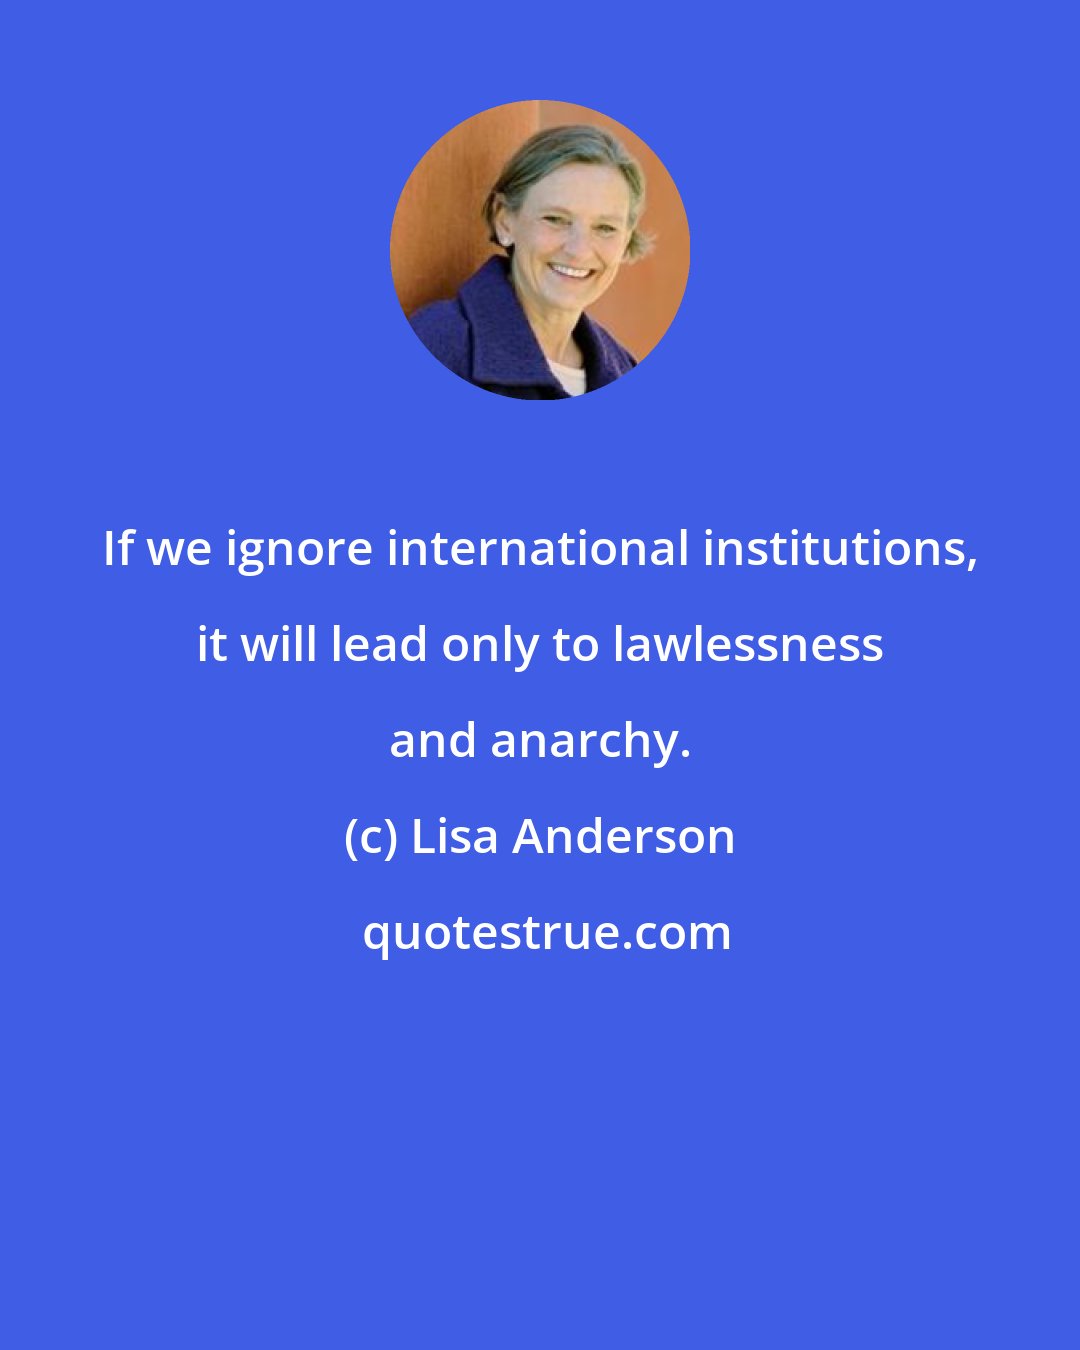 Lisa Anderson: If we ignore international institutions, it will lead only to lawlessness and anarchy.